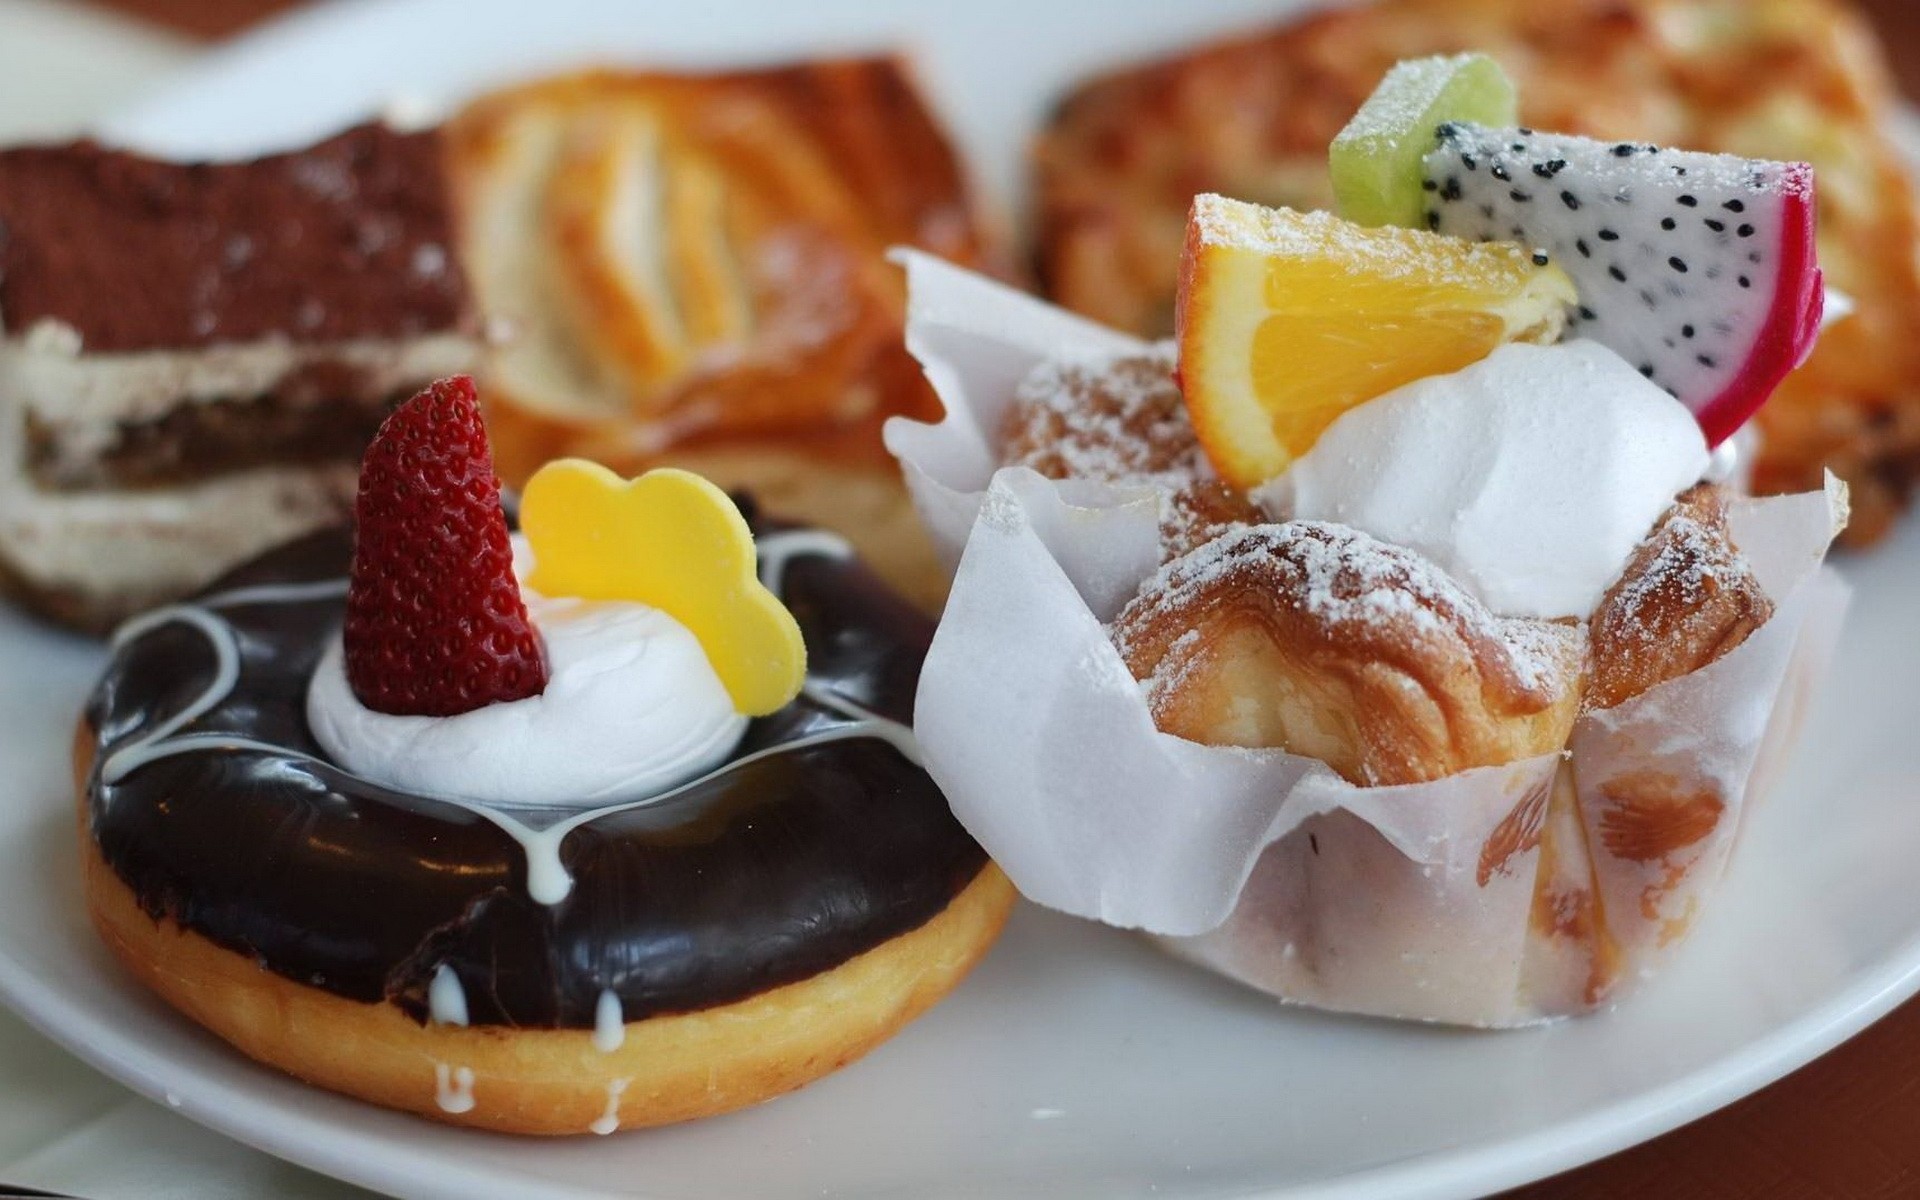 1920x1200 Wallpaper Pastries, Donuts, Fruit, Strawberry, Orange, Powdered sugar HD,  Picture, Image